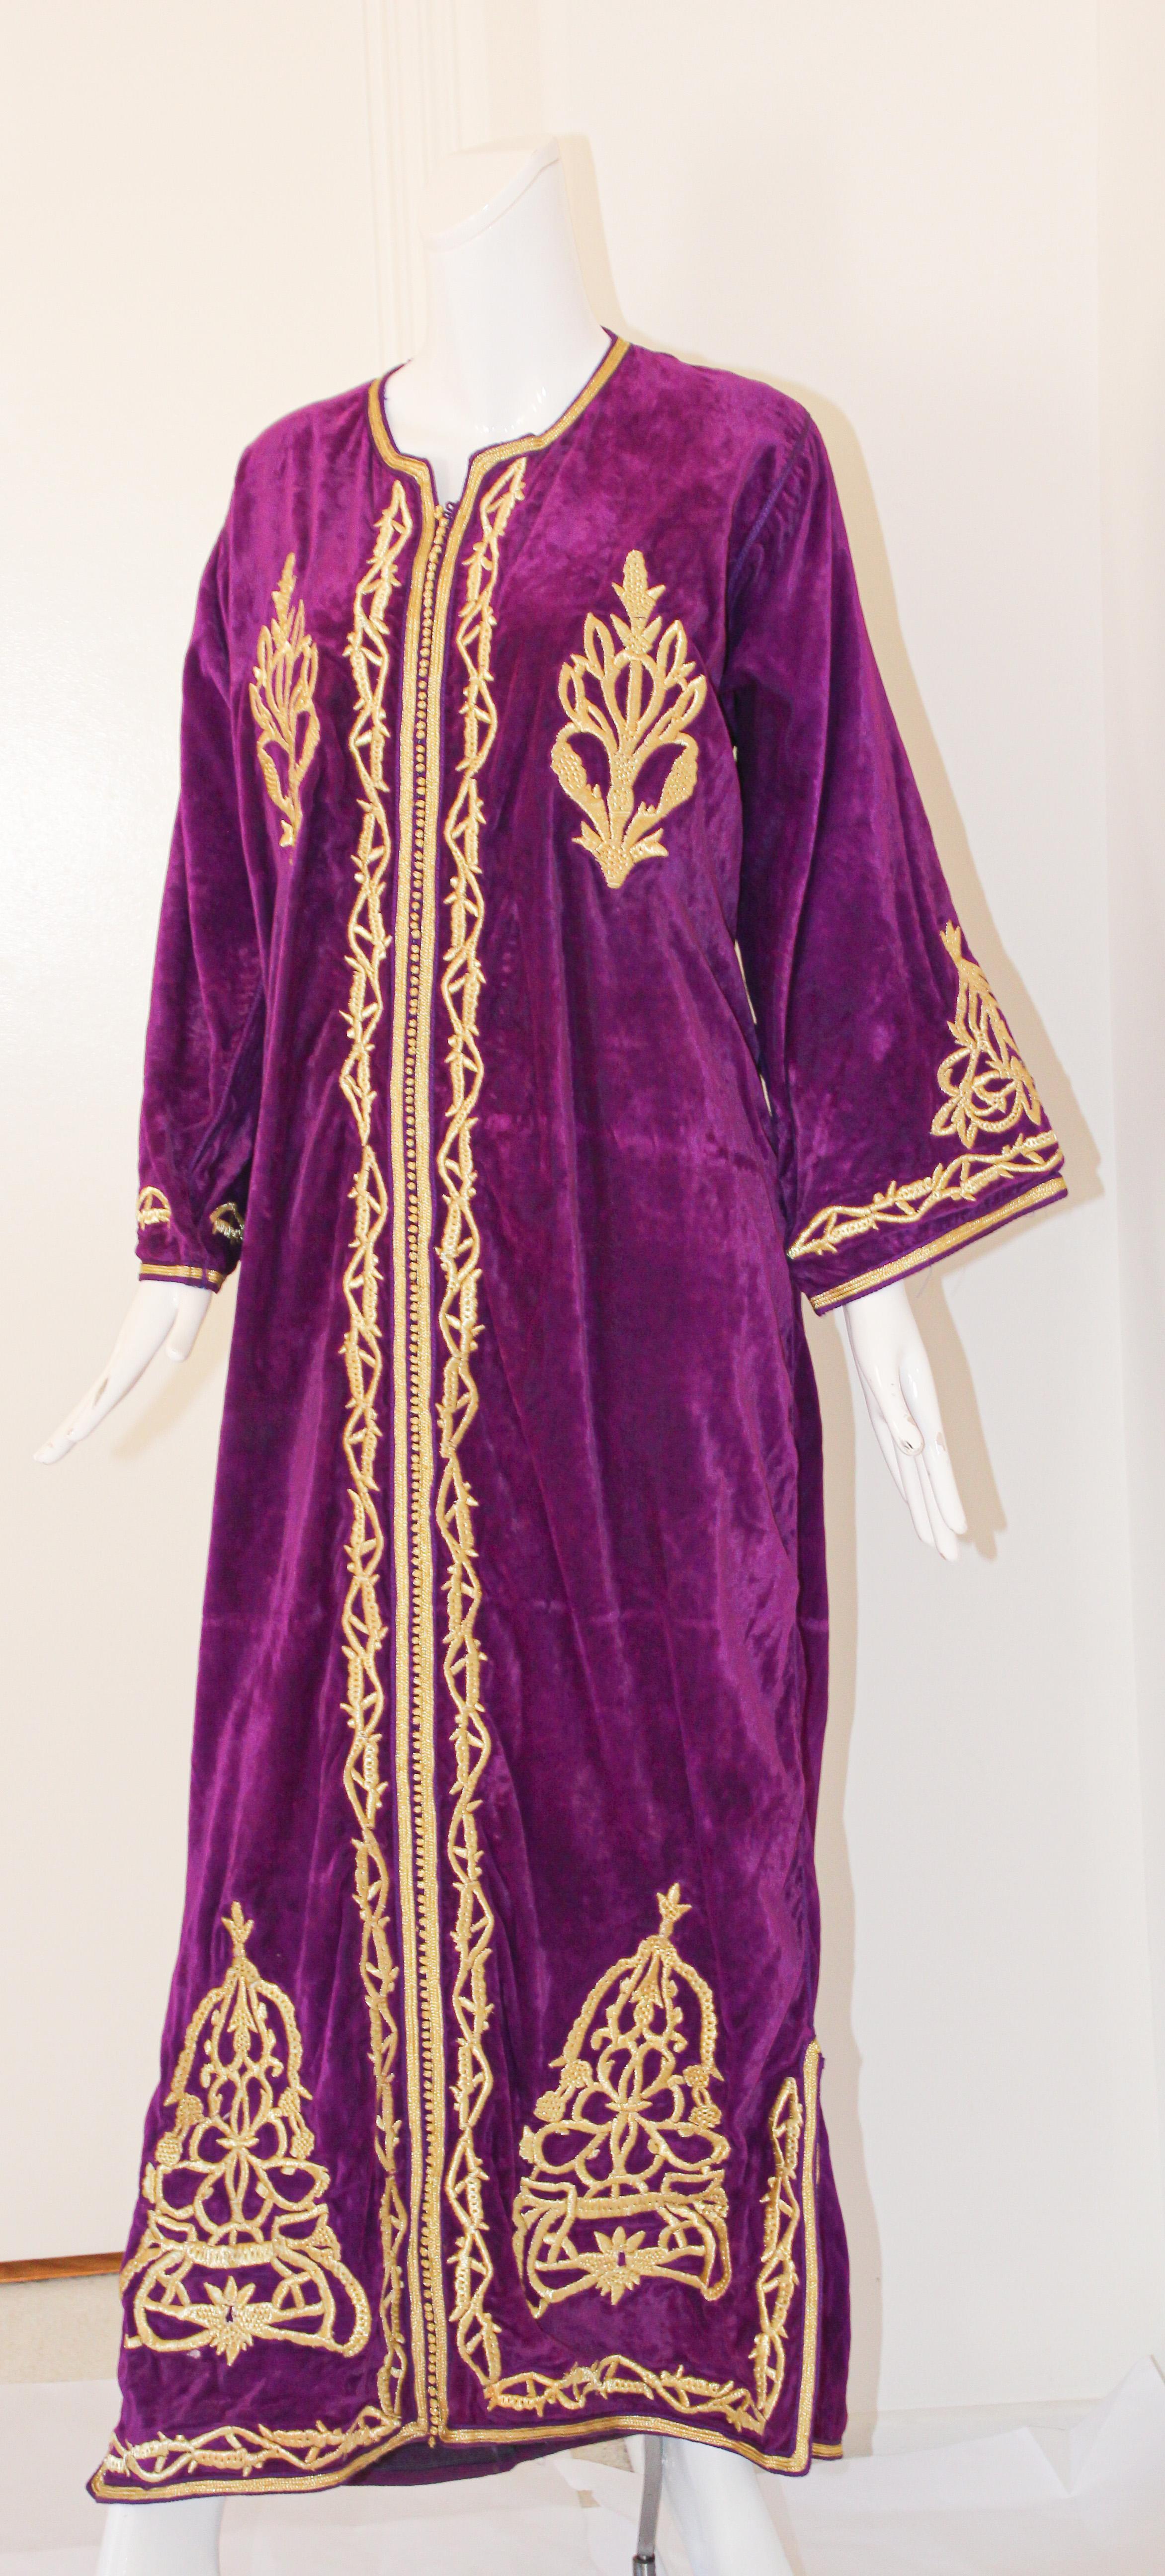 Elegant vintage designer Moroccan kaftan, purple violet color velvet embroidered with Turkish gold threads design all-over.
This is an Ottoman style wedding gown with metallic embroidered. 
The workmanship is incredibly fine. 
The Bindalli henna